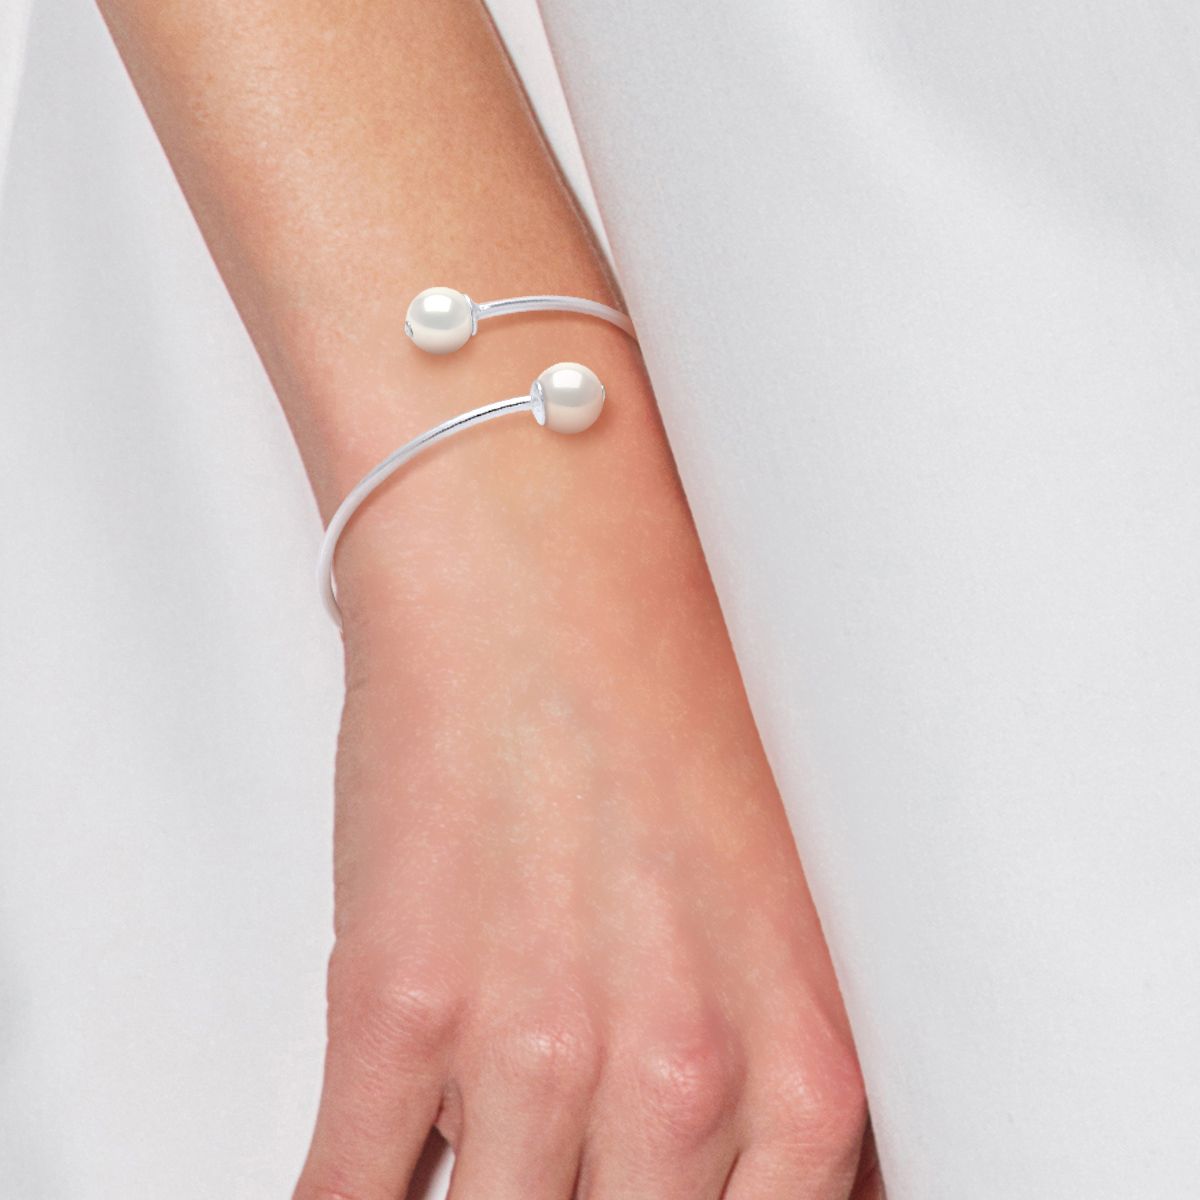 Bracelet YOU & I 925 Sterling Silver Adorned of 2 true Cultured Freshwater Pearls - Natural White Color Adjustable size - Our jewellery is made in France and will be delivered in a gift box accompanied by a Certificate of Authenticity and International Warranty